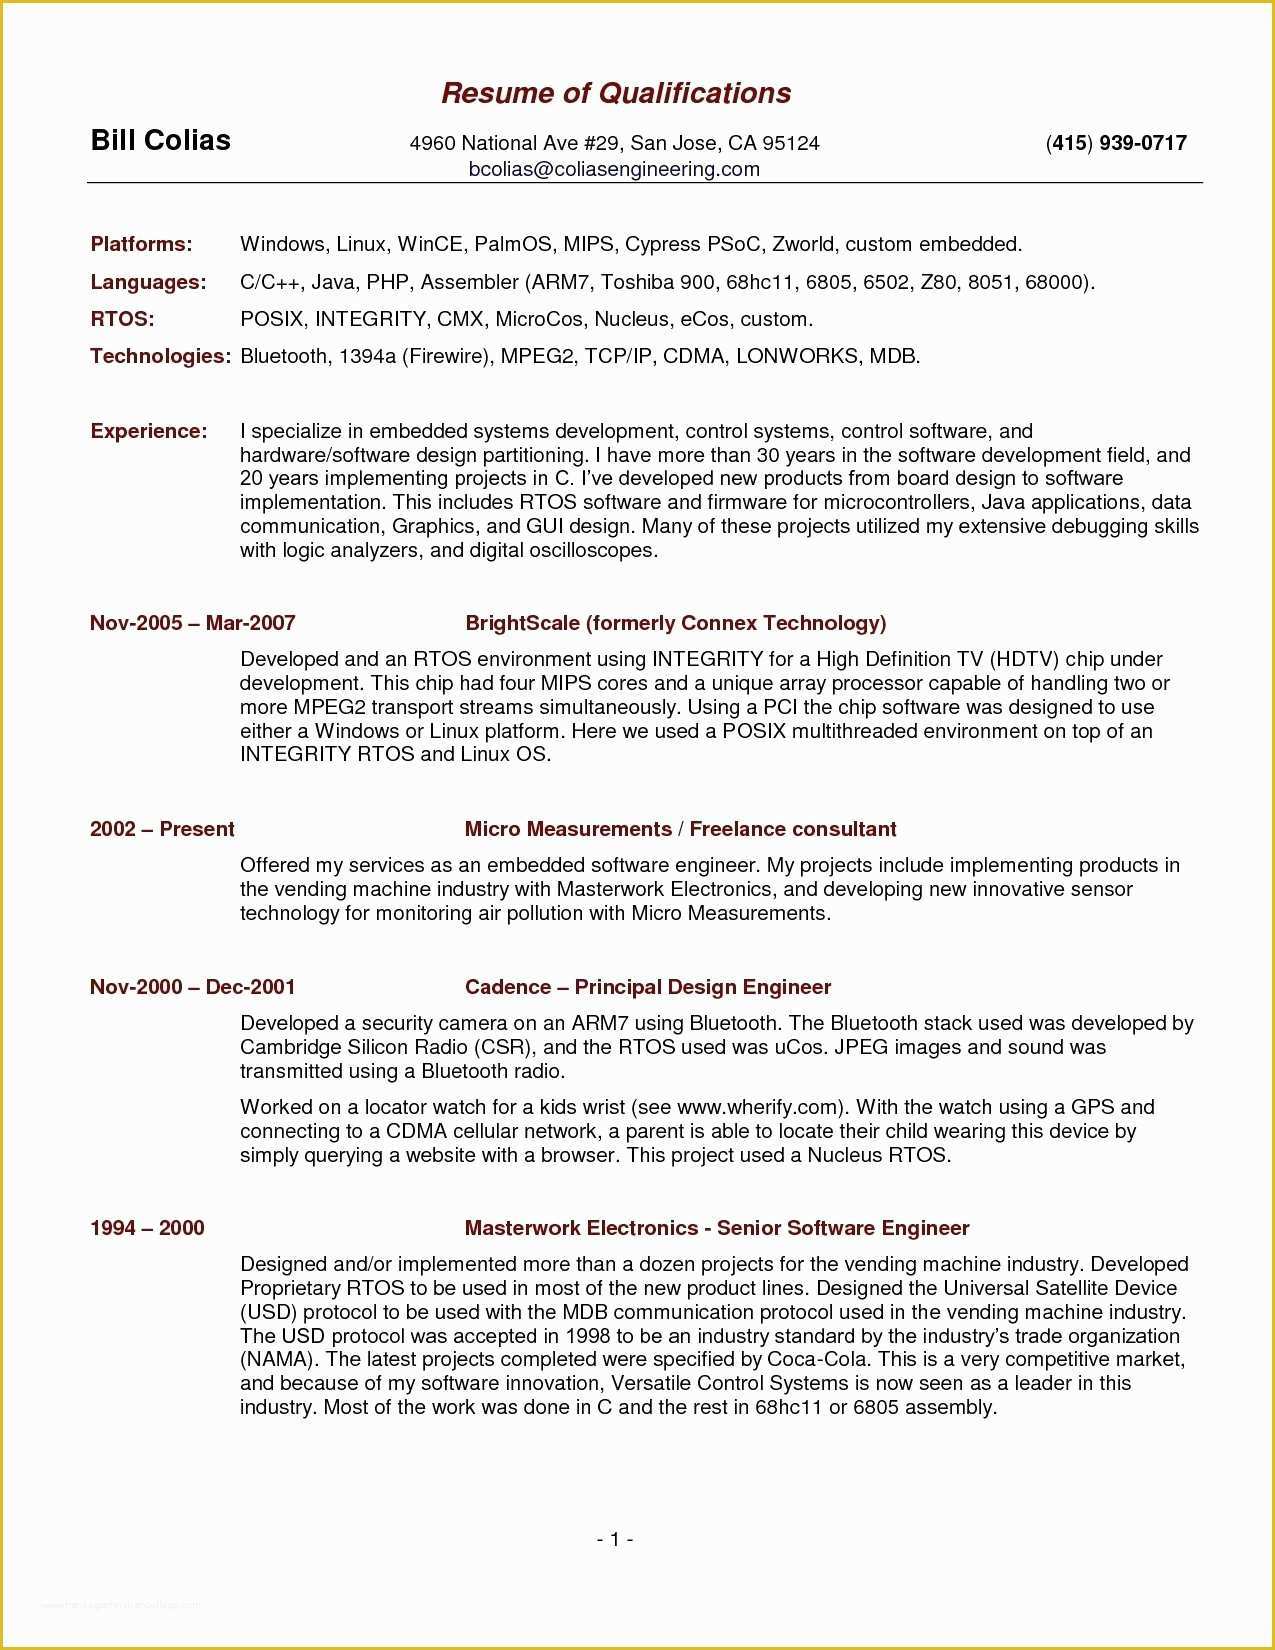 Attractive Resume Templates Free Download Of Resume Templet Valid attractive Resume Templates Free